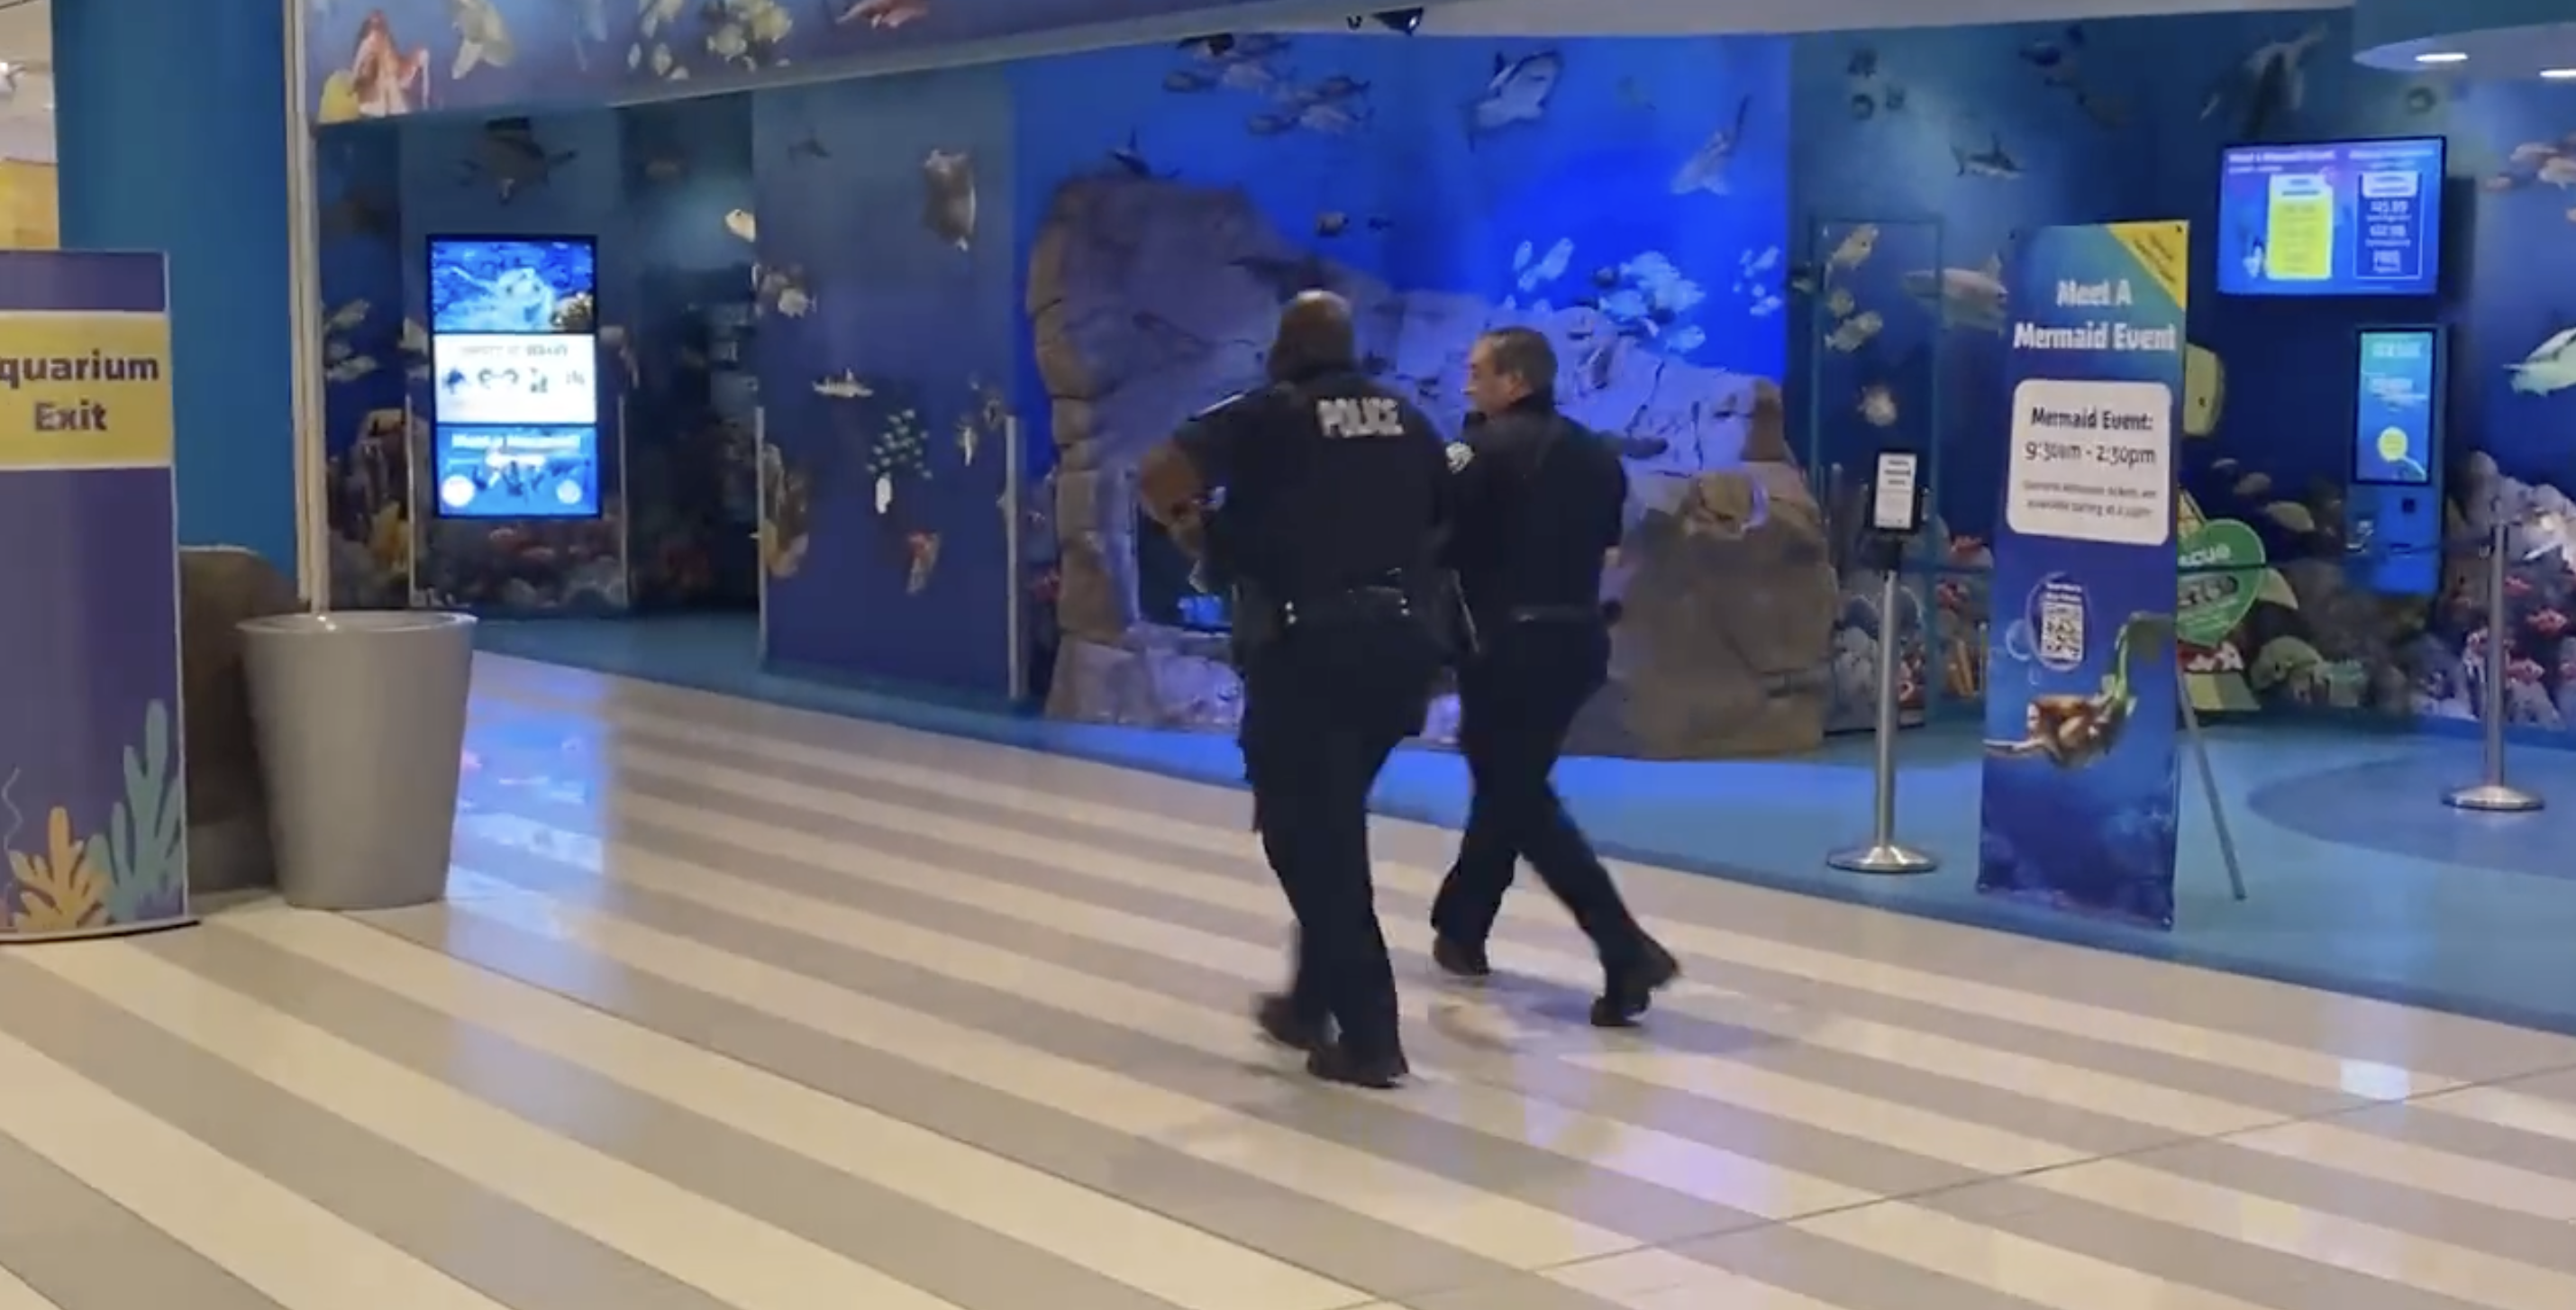 JUST IN: Social Media Users Circulate Video of Apparent Shooting at the Mall of America